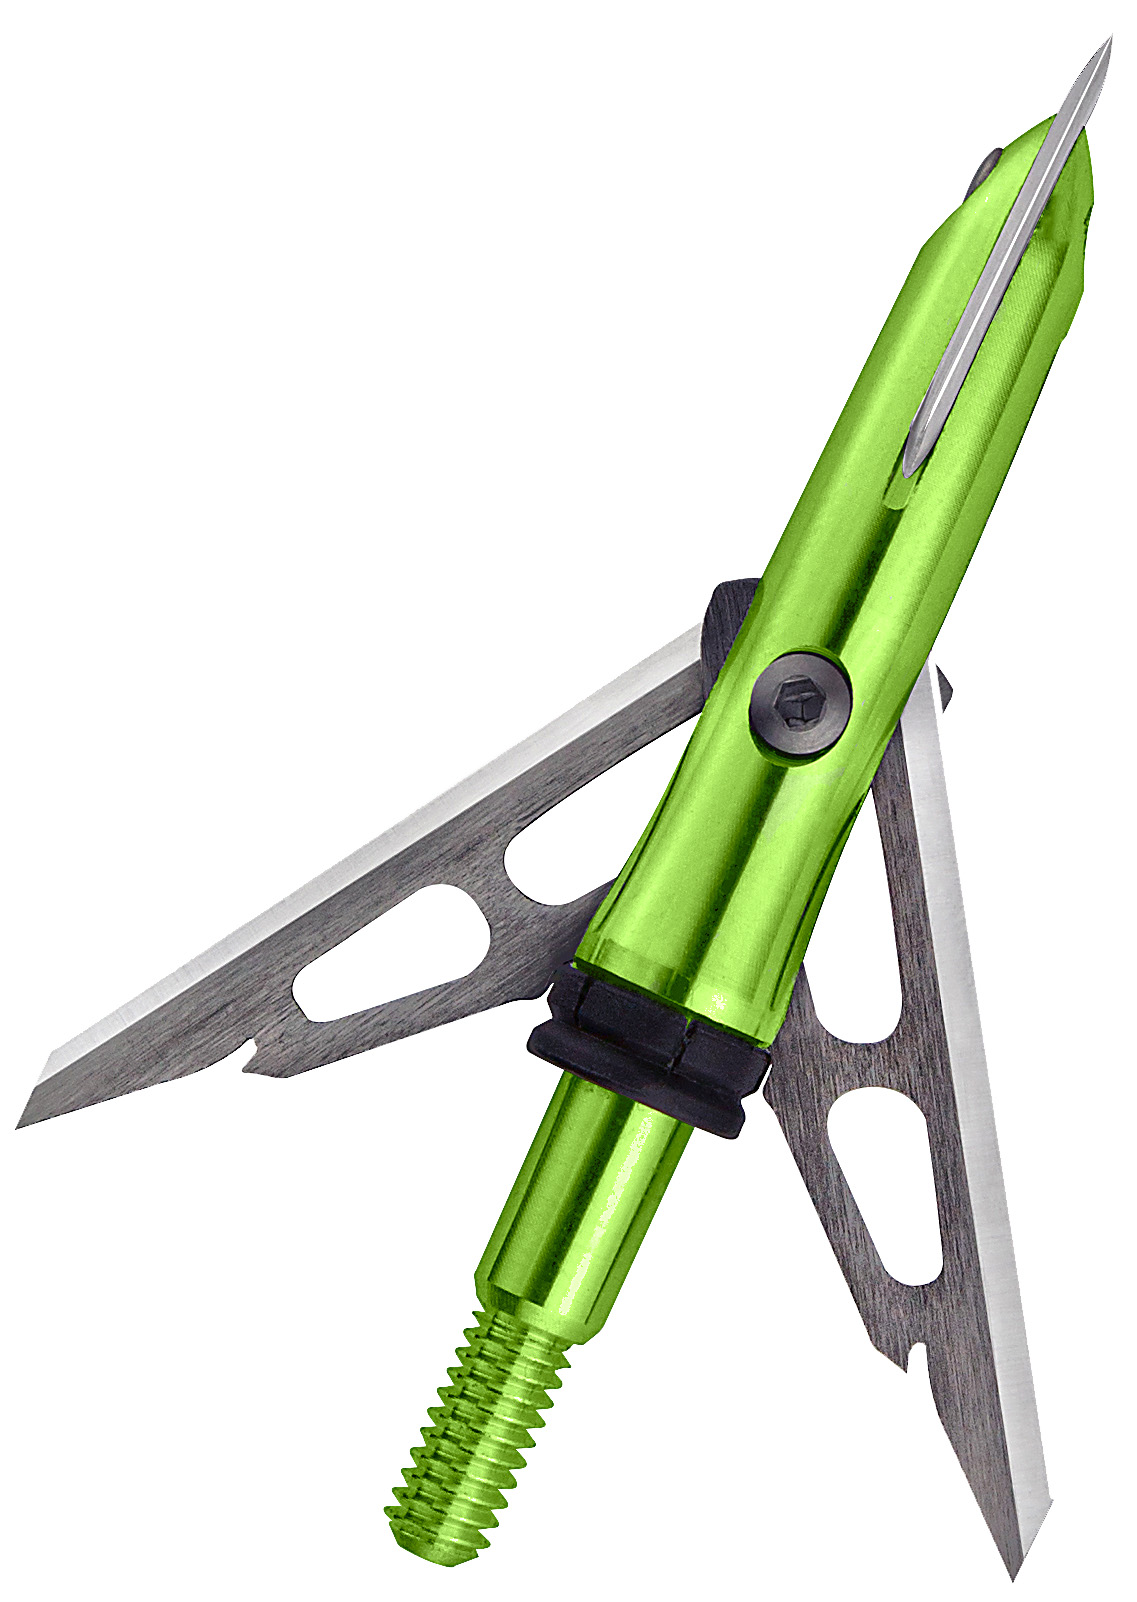 go-green-with-the-new-rage-ss-broadhead-for-lower-poundage-bows